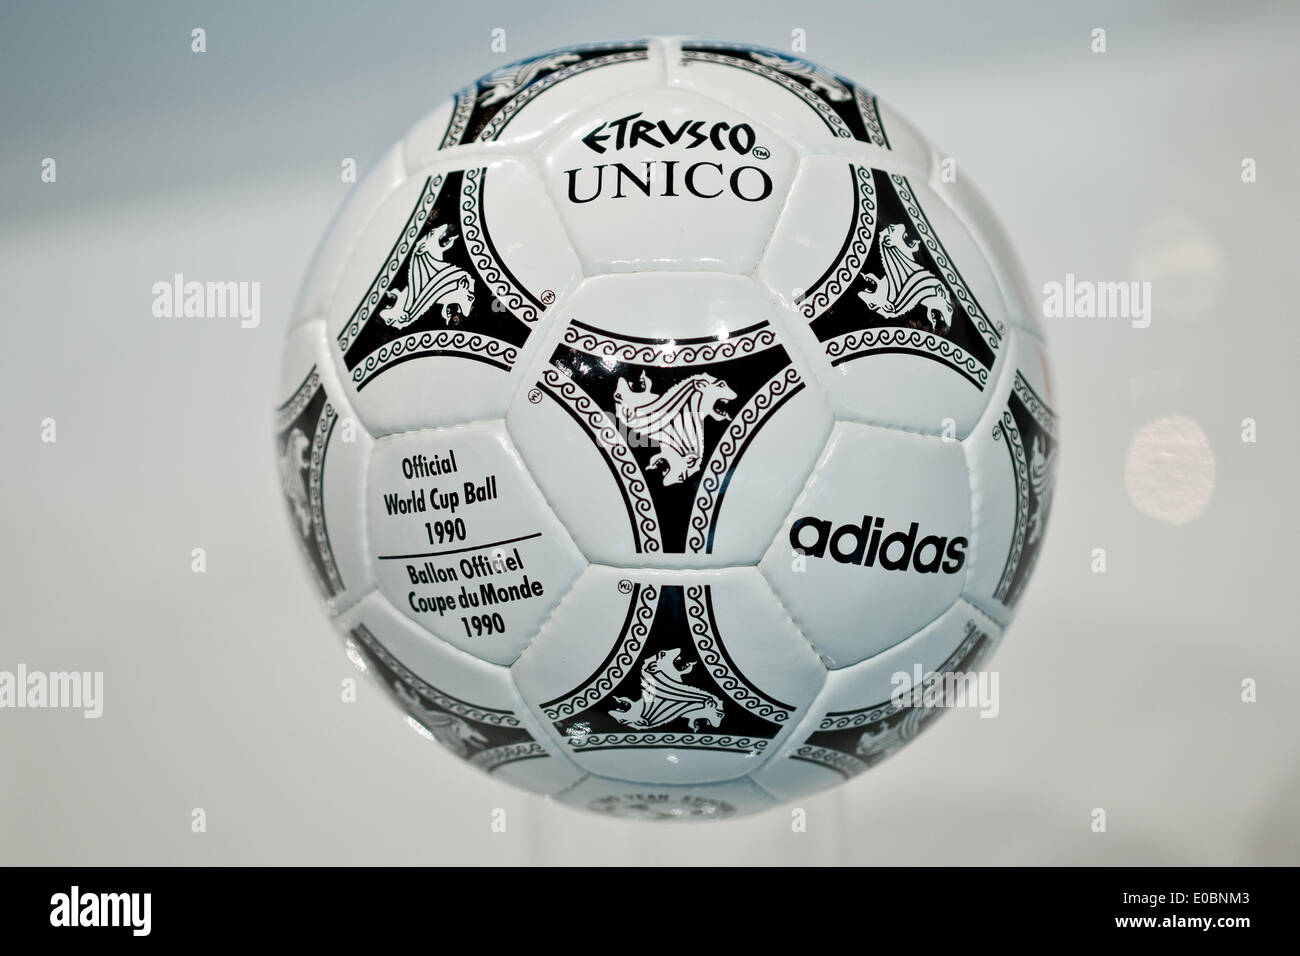 Fuerth, Germany. 08th May, 2014. The 'Etrusco Unico' soccer ball which was  the official ball of the 1990 soccer world cup in Italy is pictured during  the general meeting of sporting goods